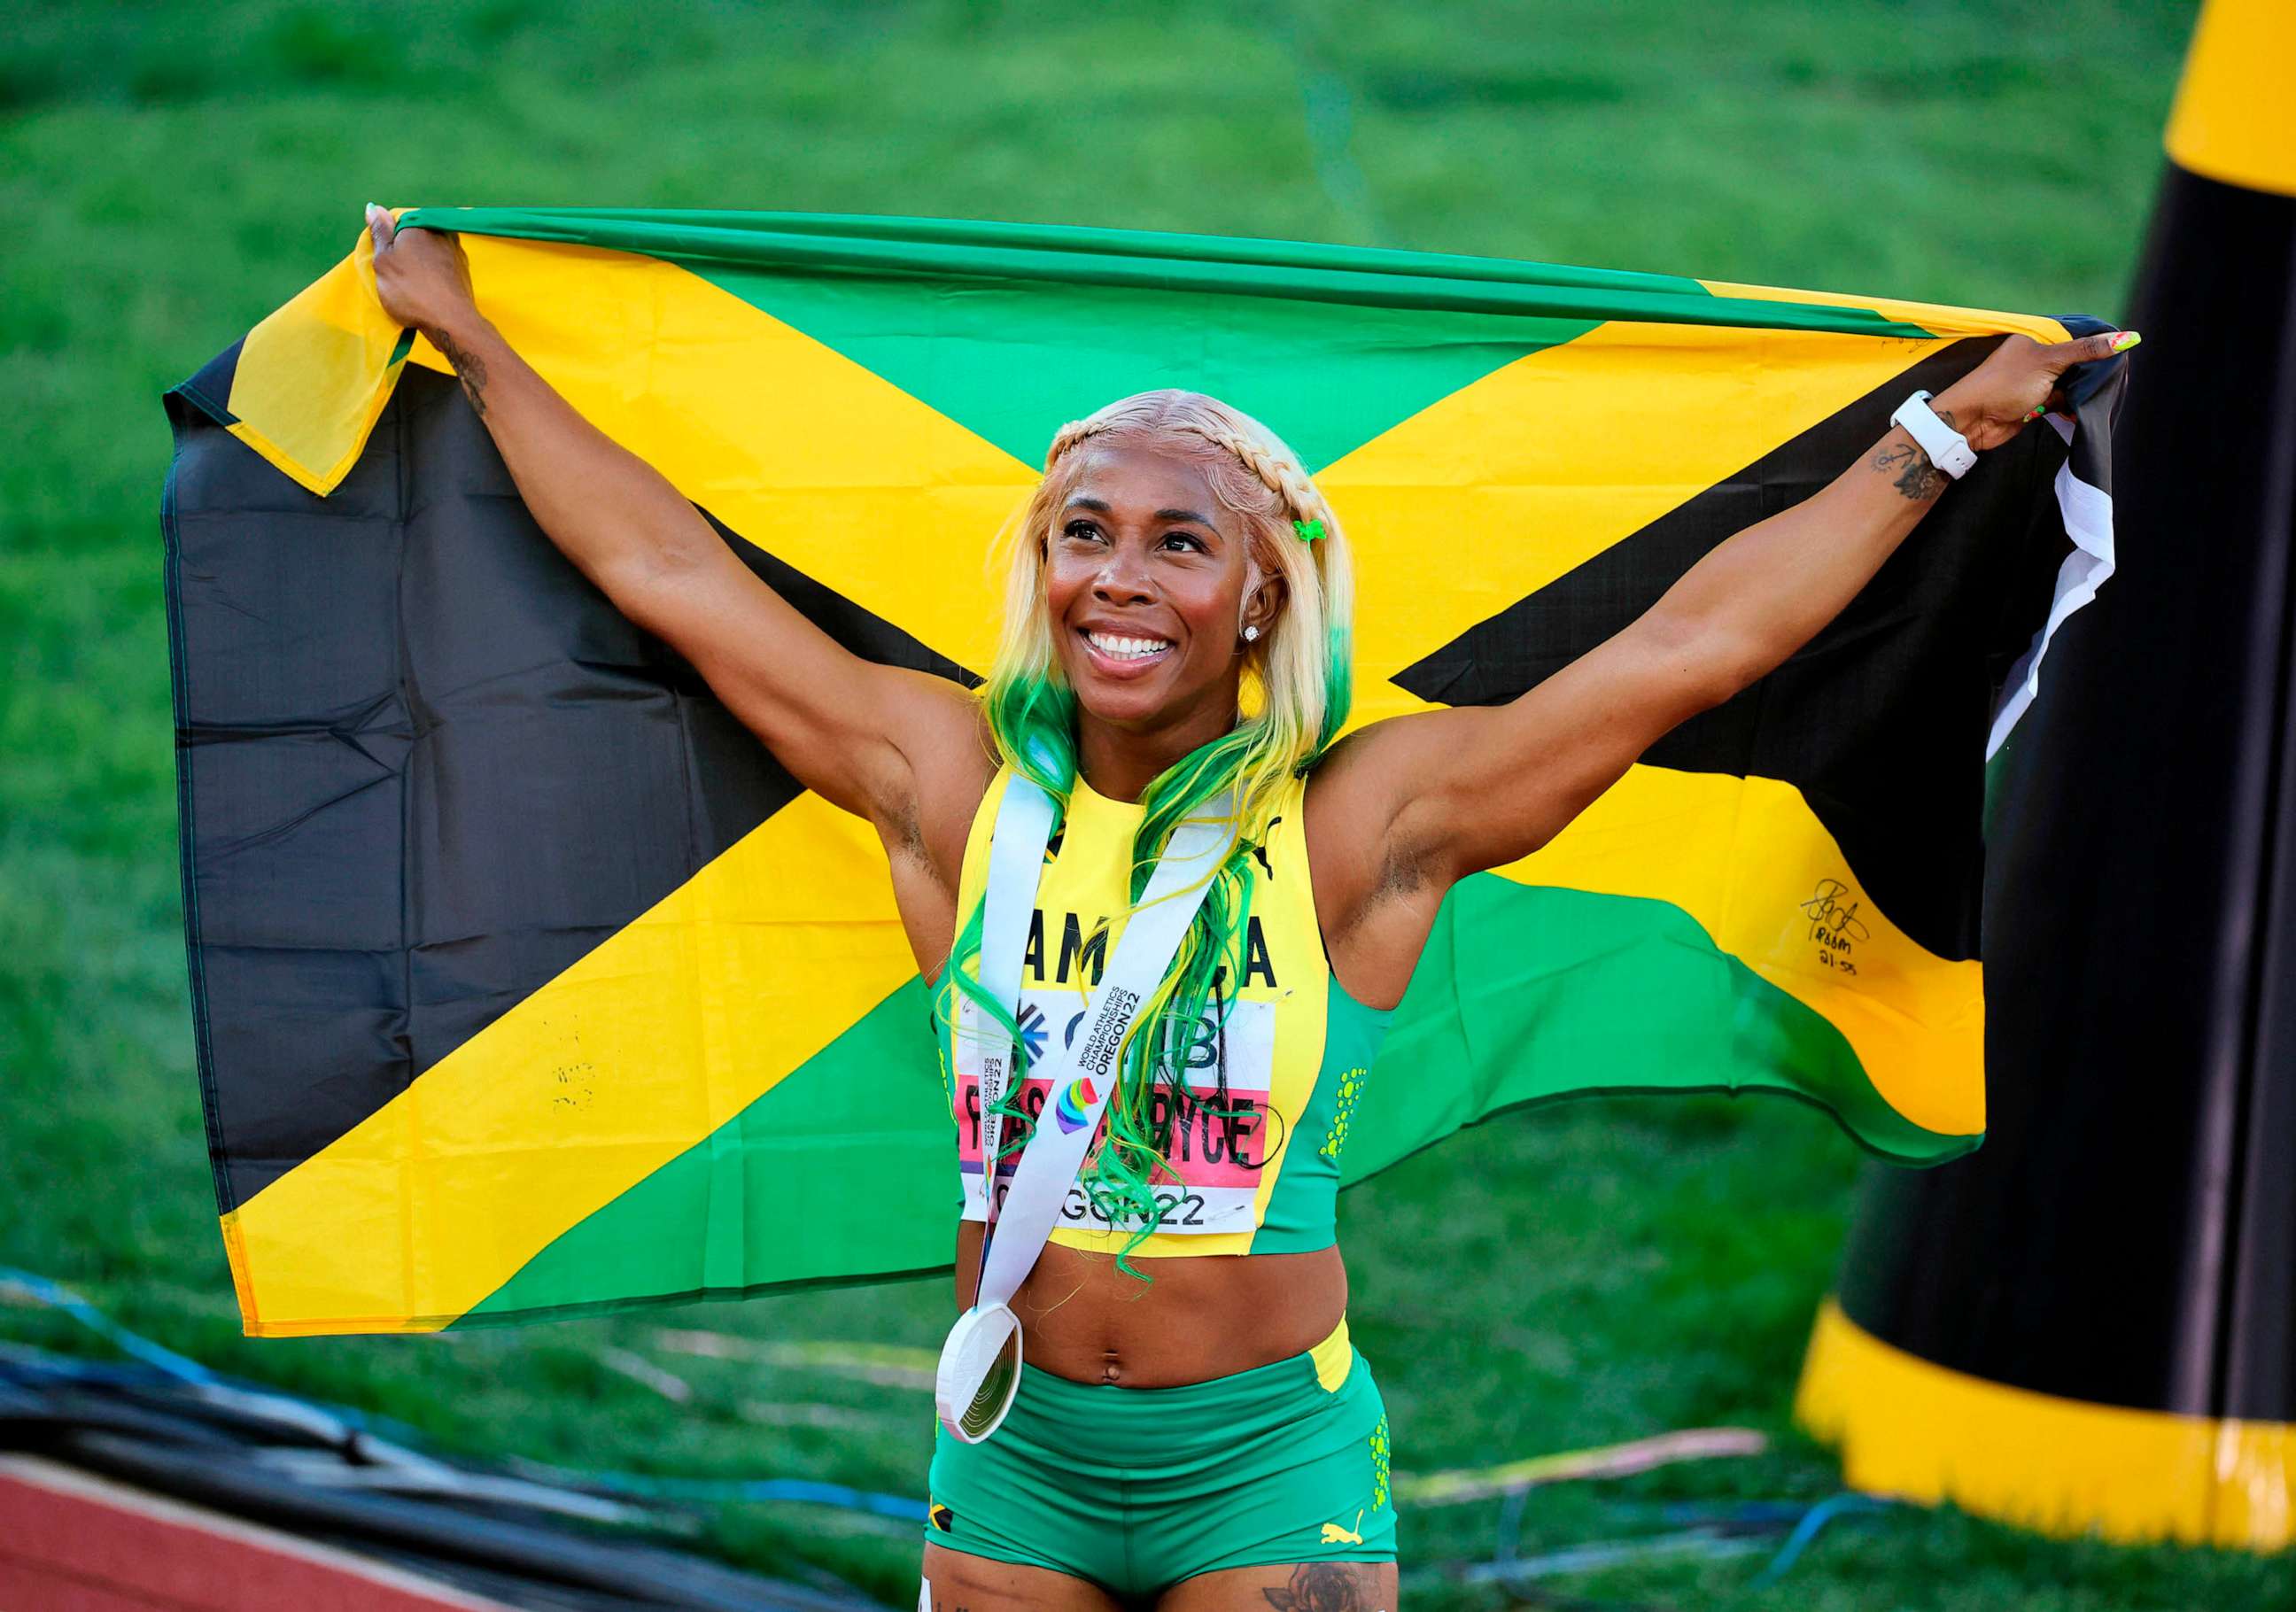 PHOTO: In this July 17, 2022, file photo, Shelly-Ann Fraser-Pryce of Jamaica reacts after winning the gold medal in the women's 100-meter final at the World Athletics Championships Oregon 22 in Eugene, Oregon.